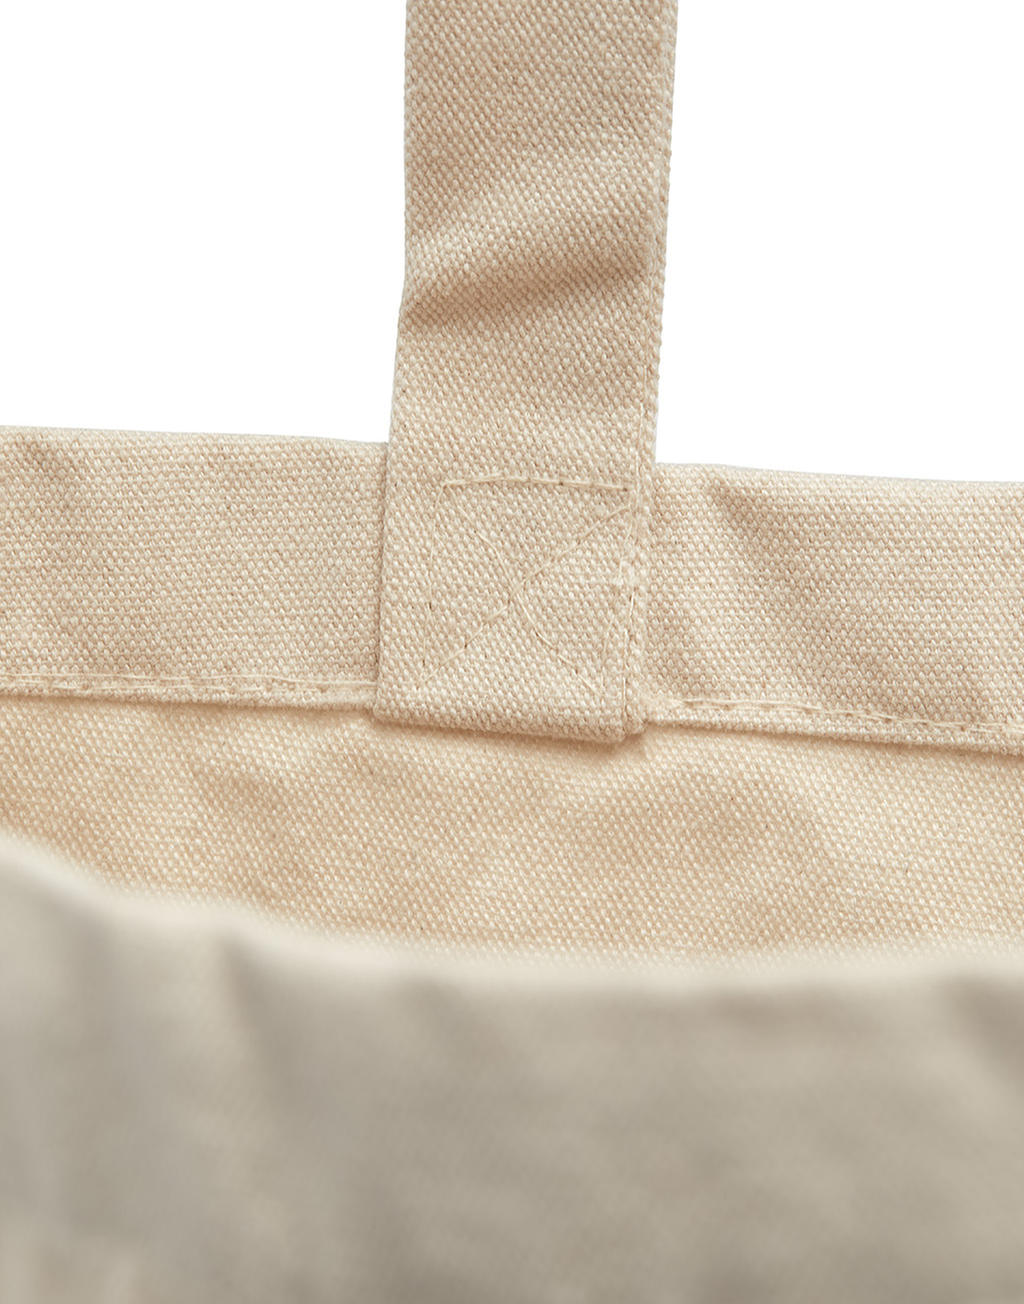  Canvas Cotton Bag LH with Gusset in Farbe Natural